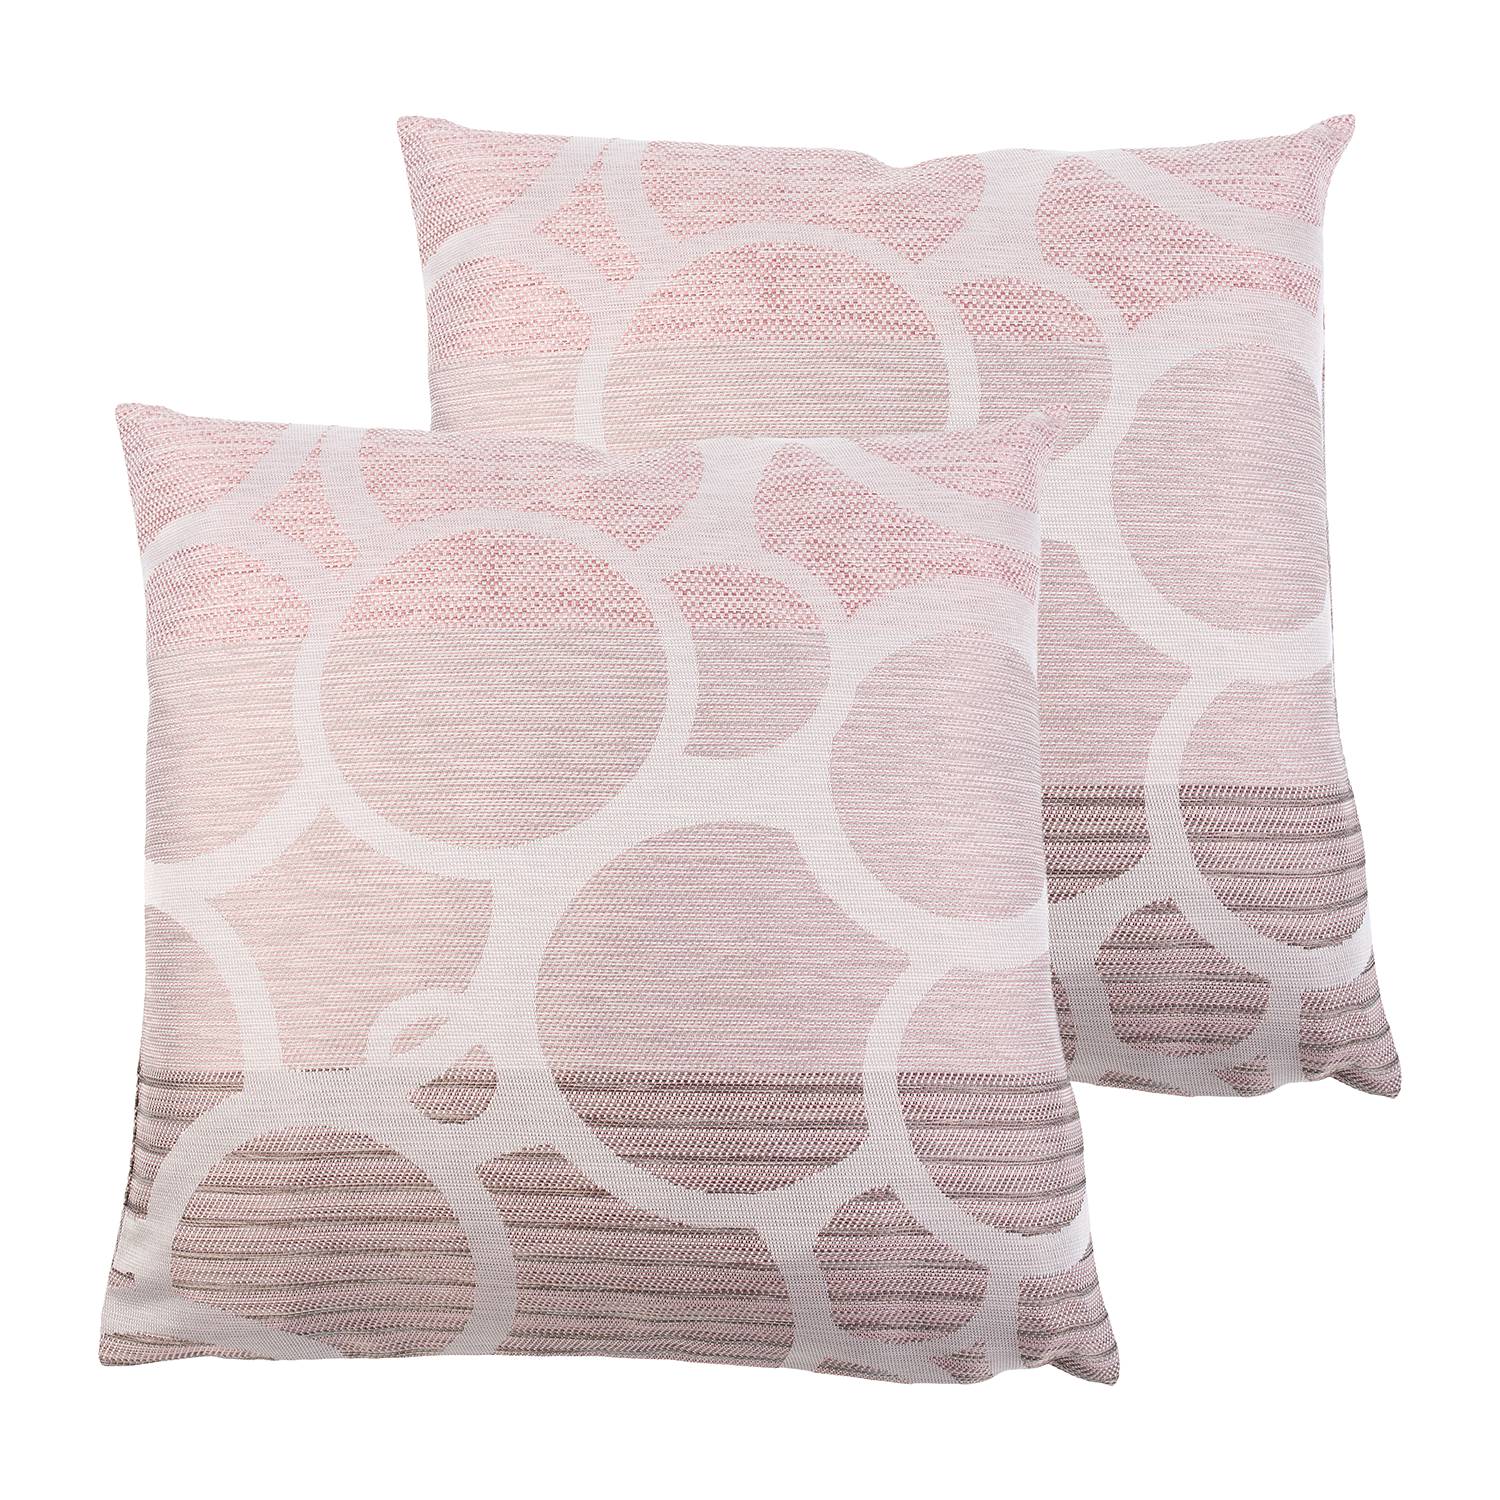 Image of Housses de coussin Conelly 000000001000156156